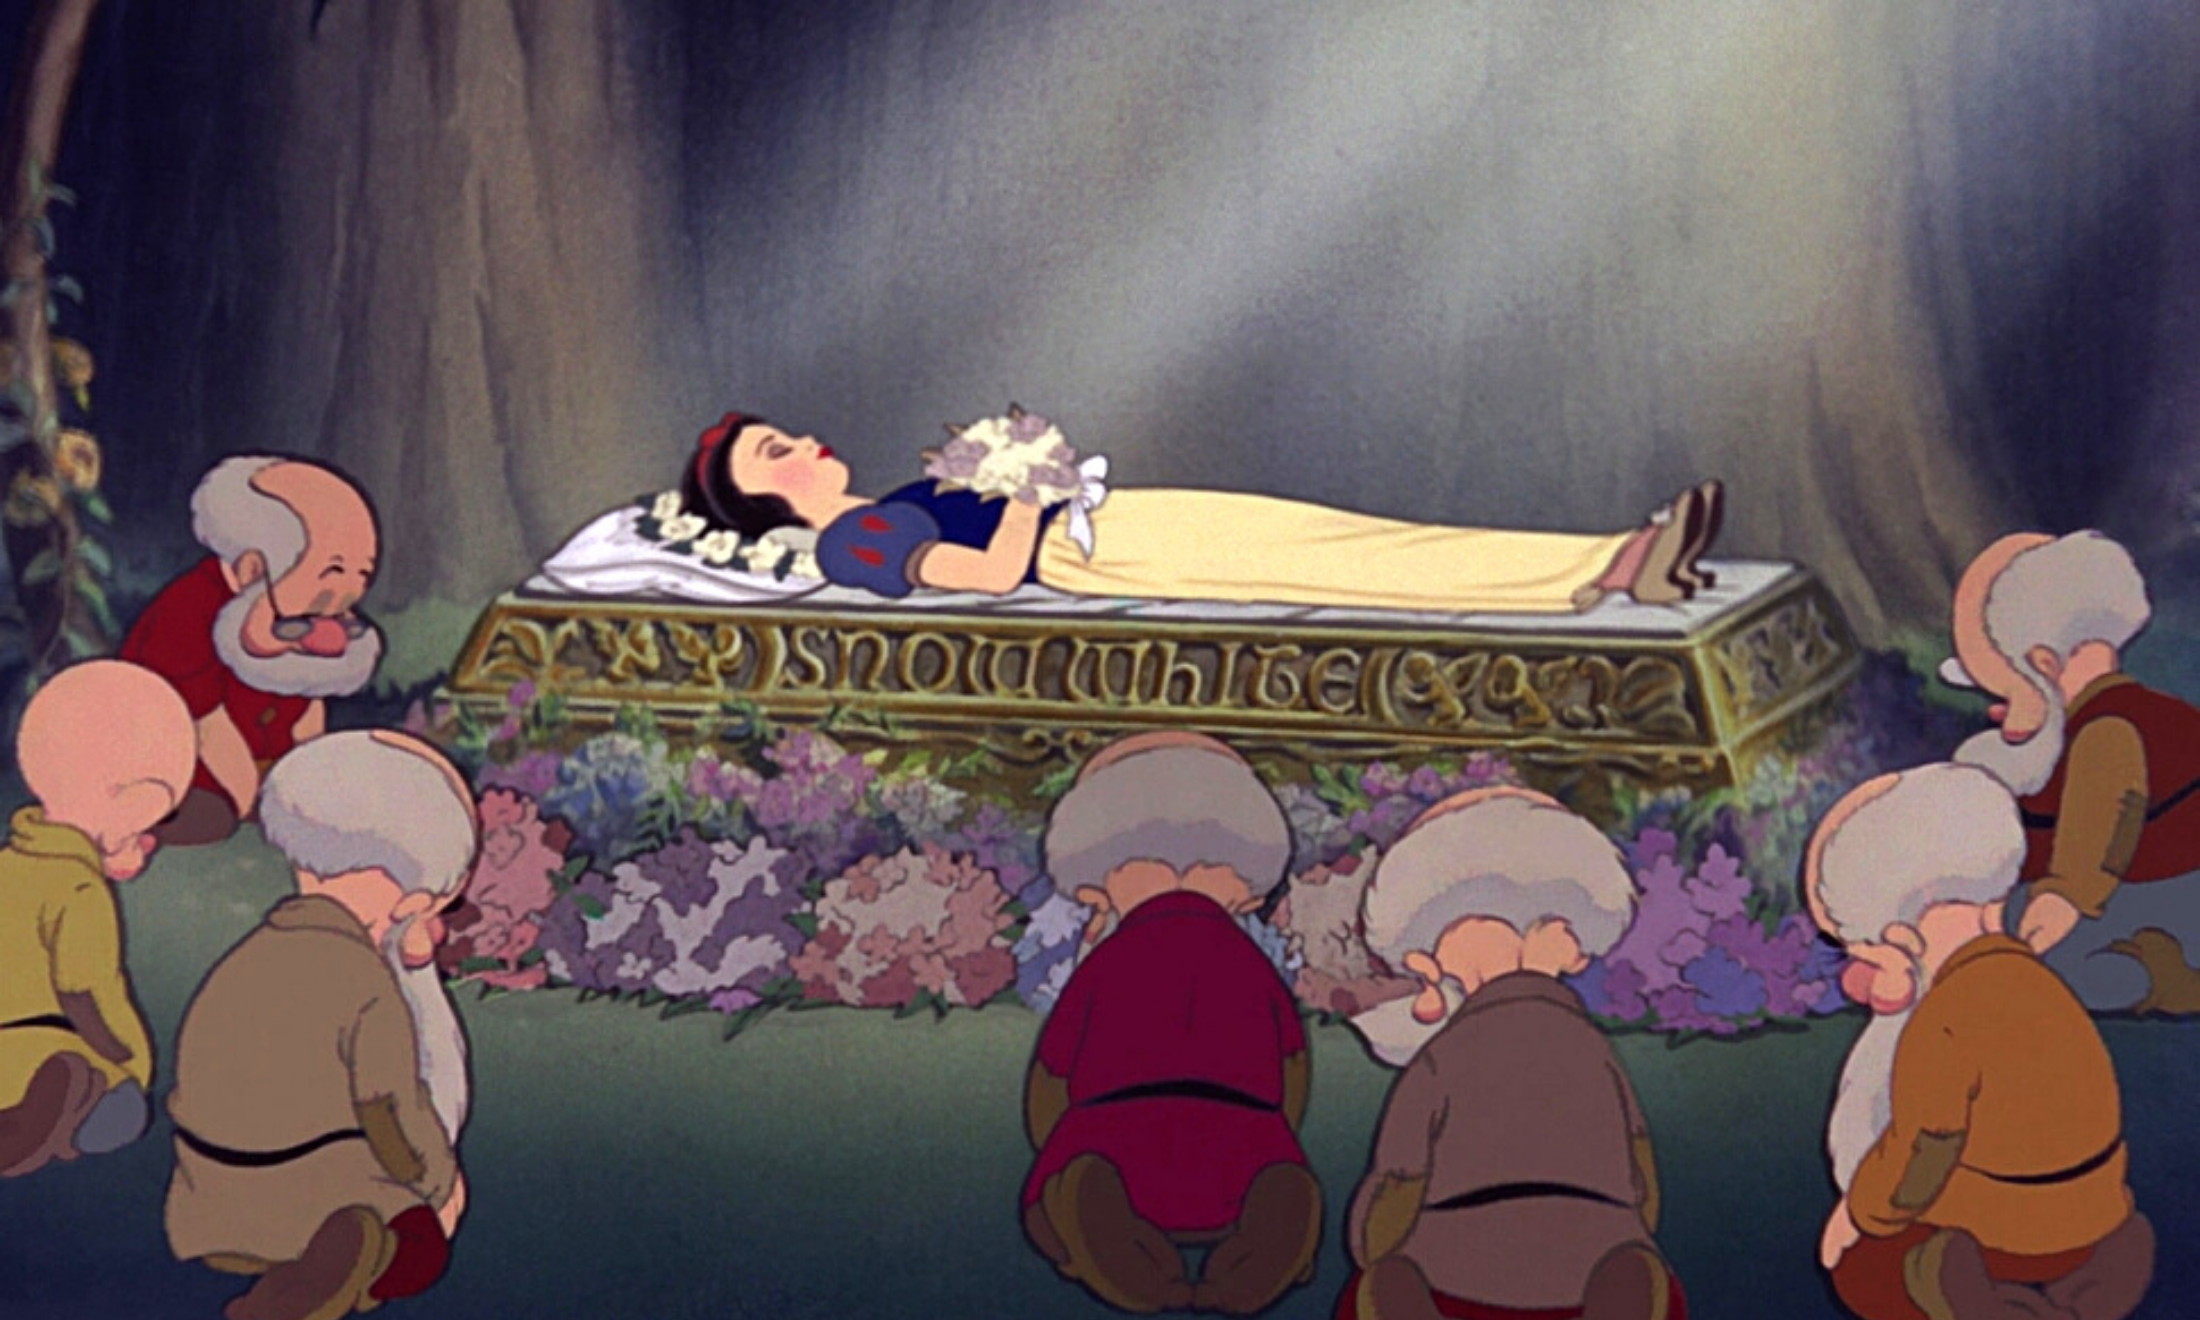 How Disney cartoons helped me deal with the fear of death